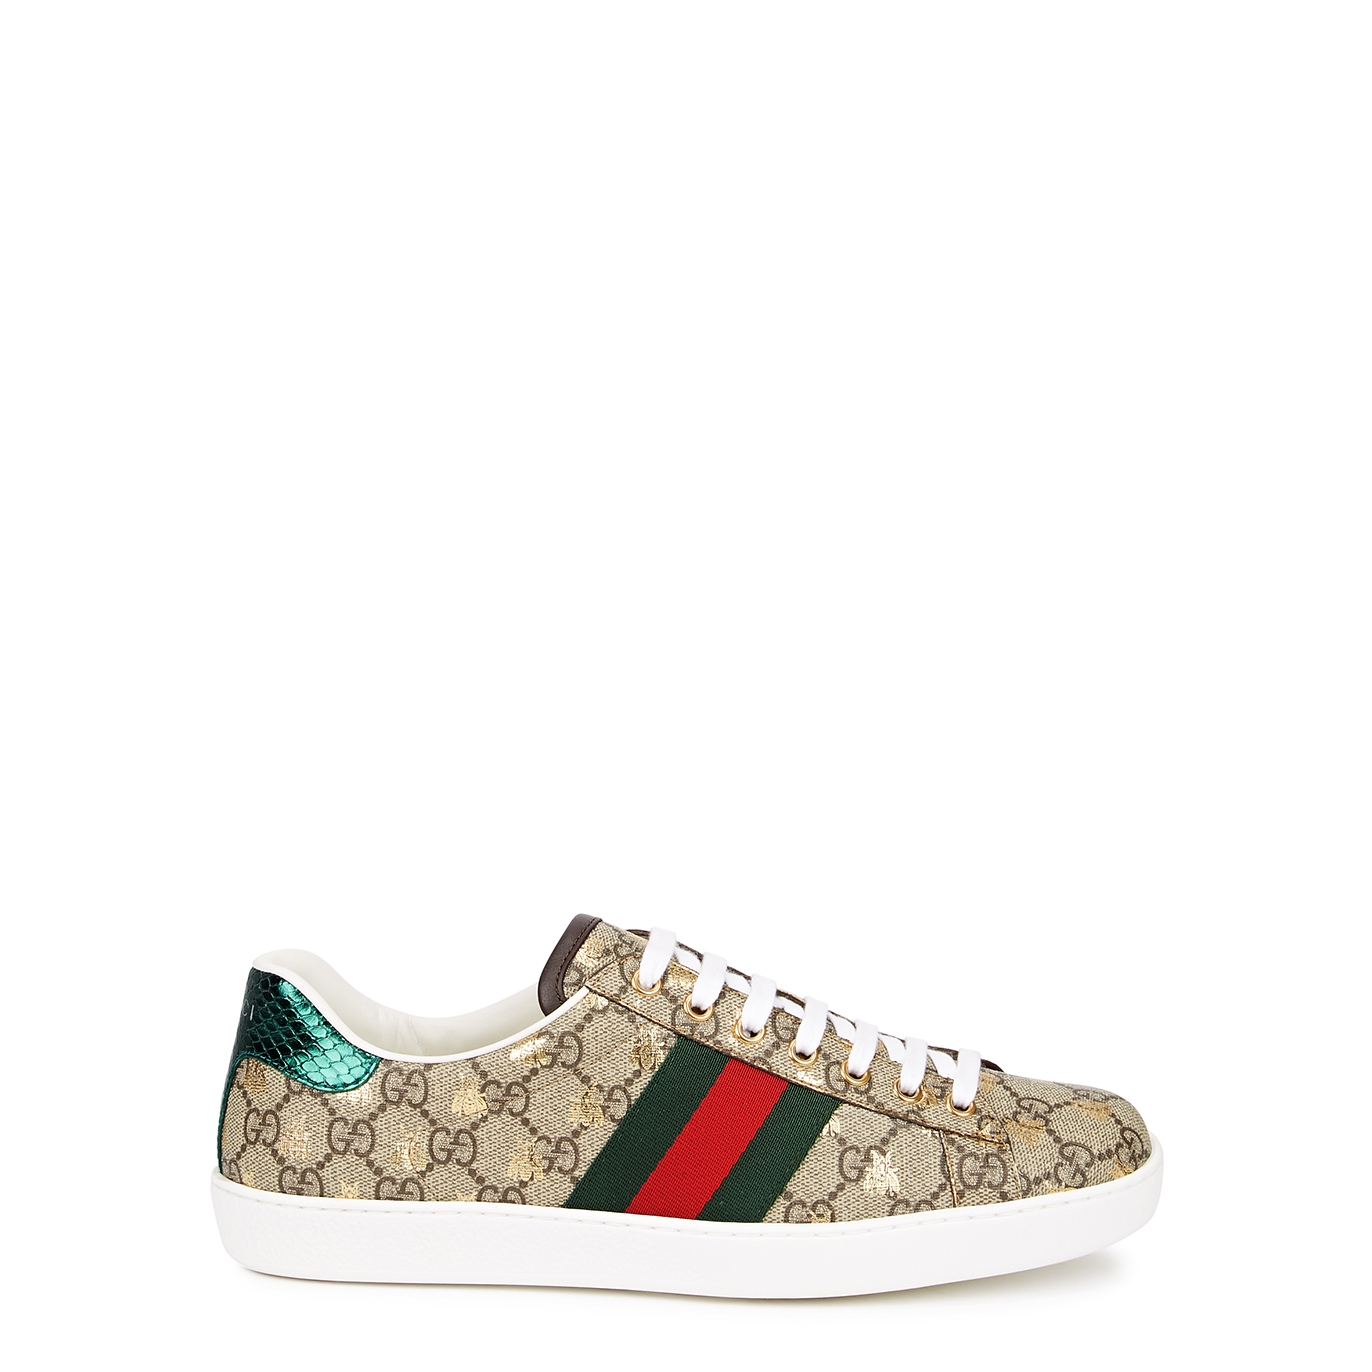 Gucci Ace GG Supreme Bee-print Monogrammed Sneakers